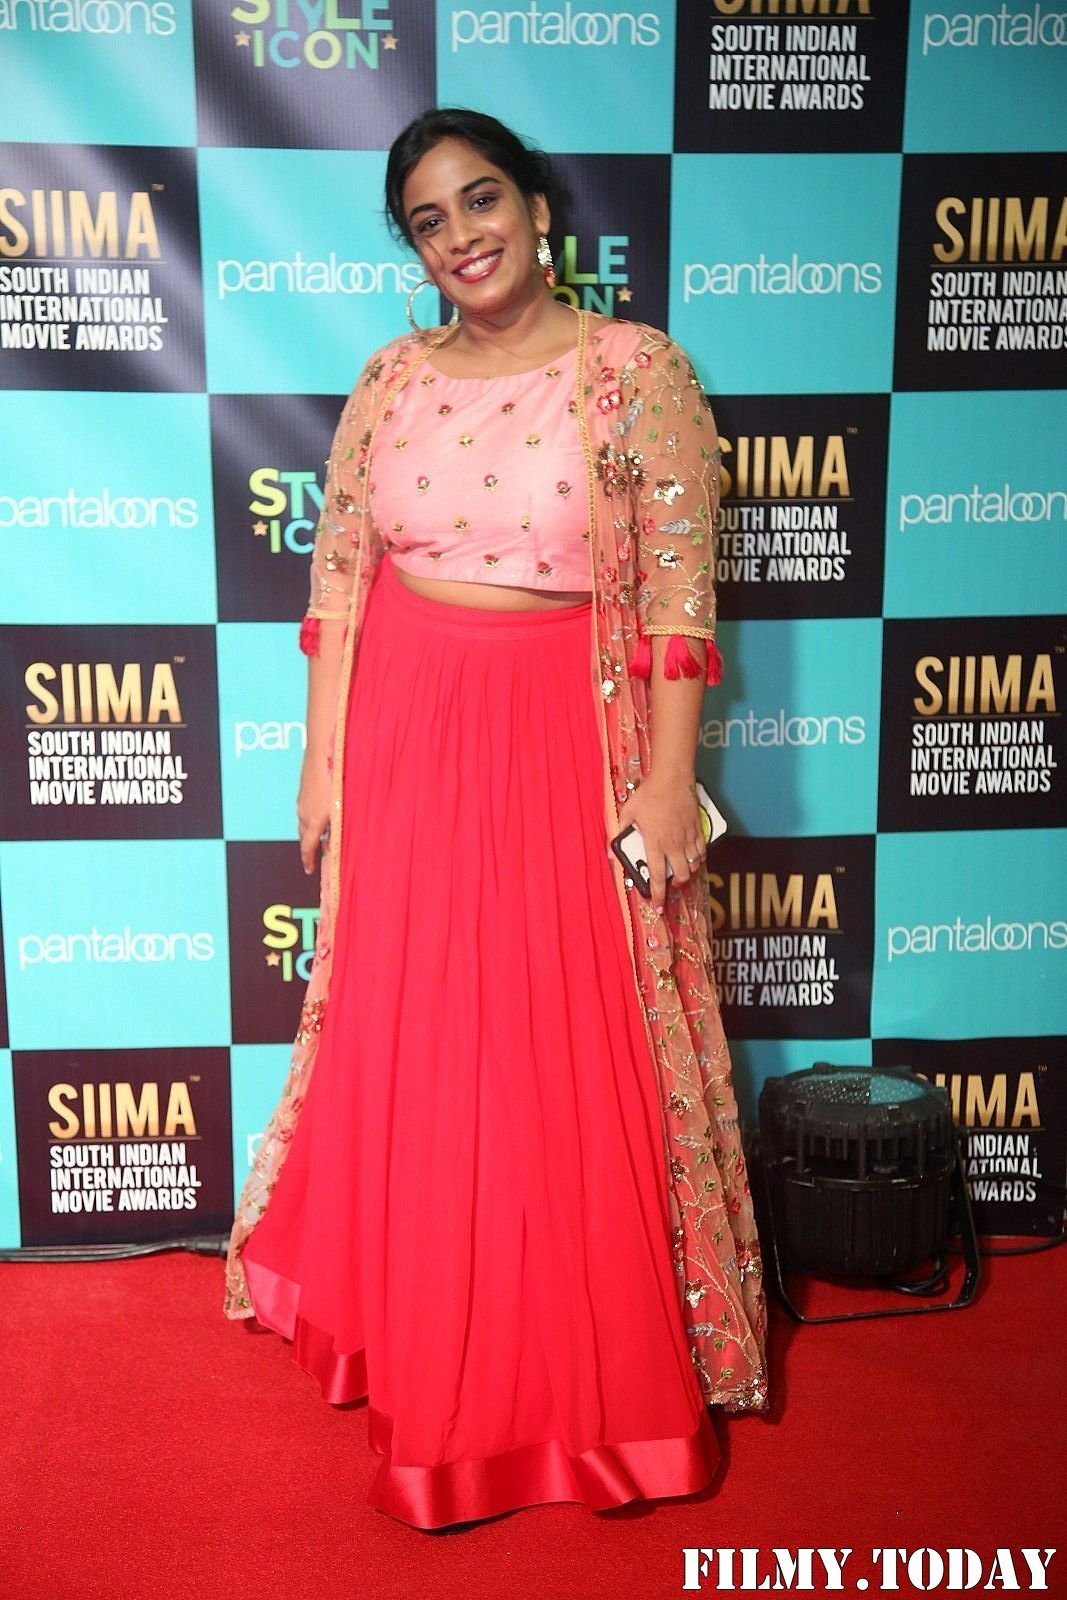 SIIMA Awards 2019 Photos | Picture 1675510